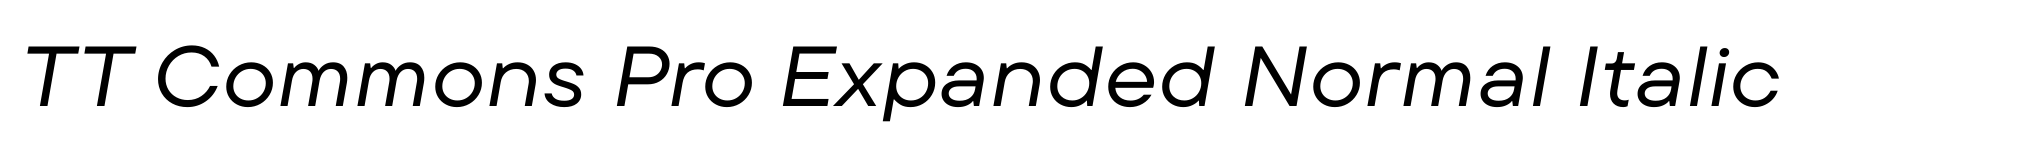 TT Commons Pro Expanded Normal Italic image